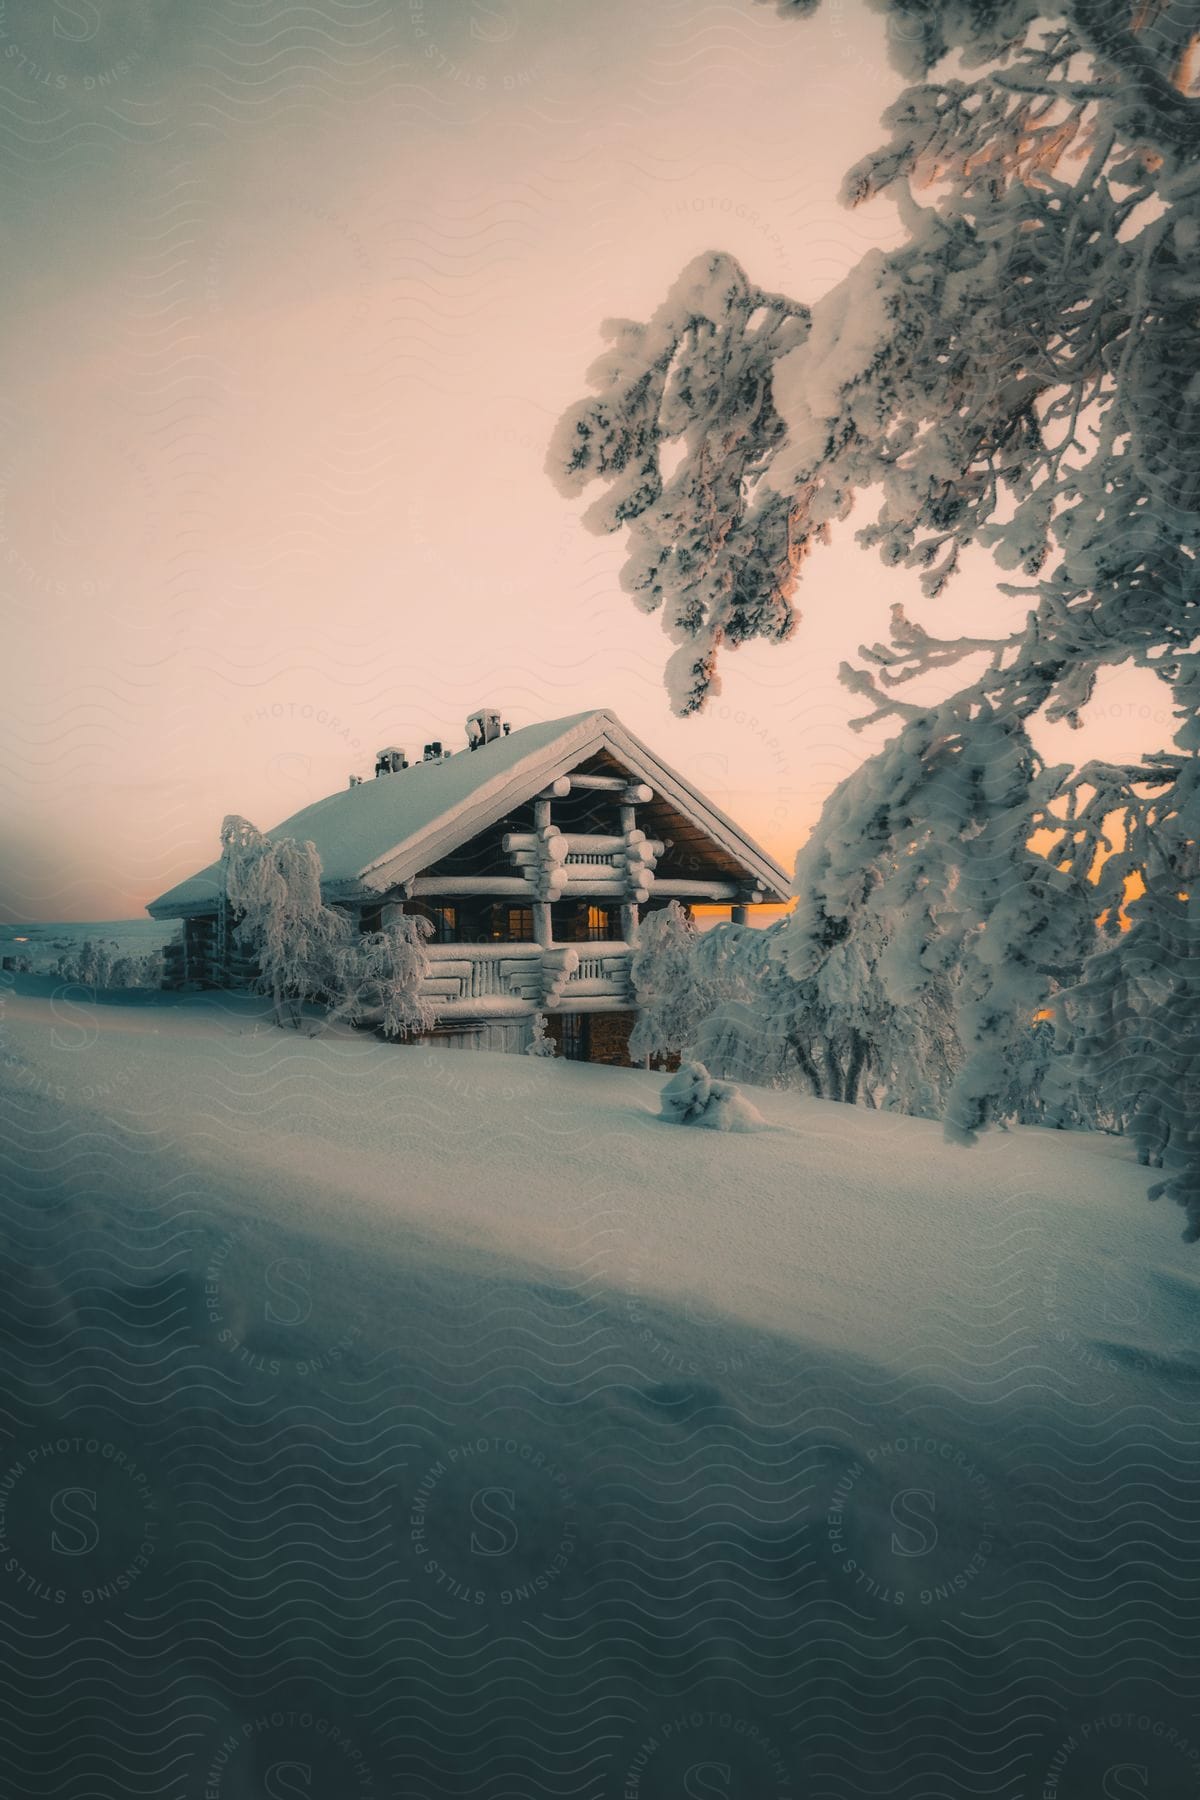 Snow covered house and trees on a mountain